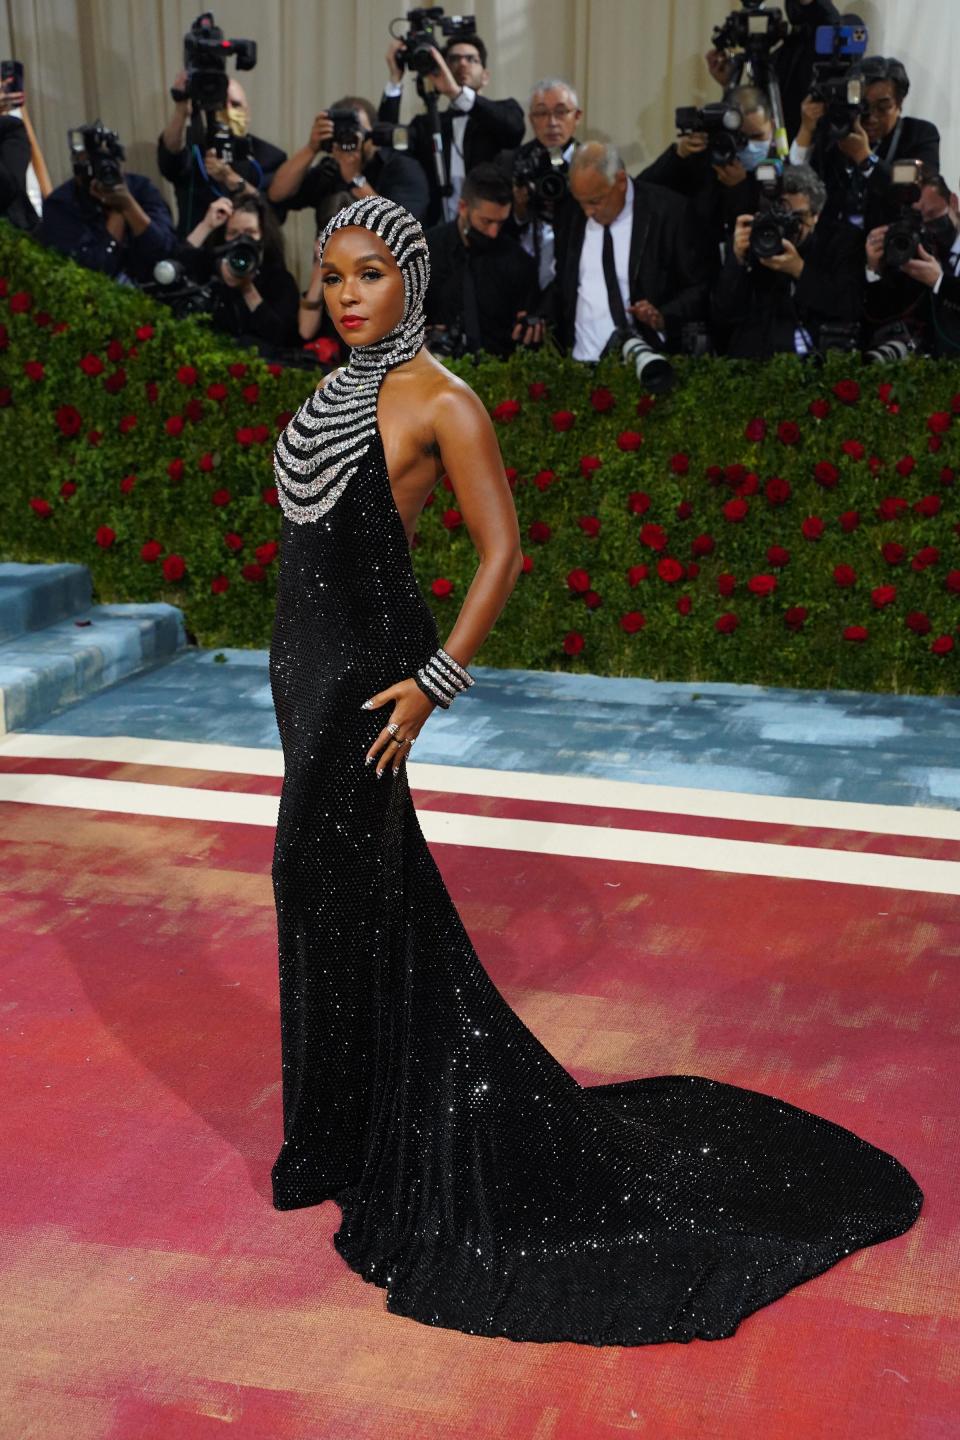 Janelle Monáe in a sparkling black gown at the 2022 Met Gala